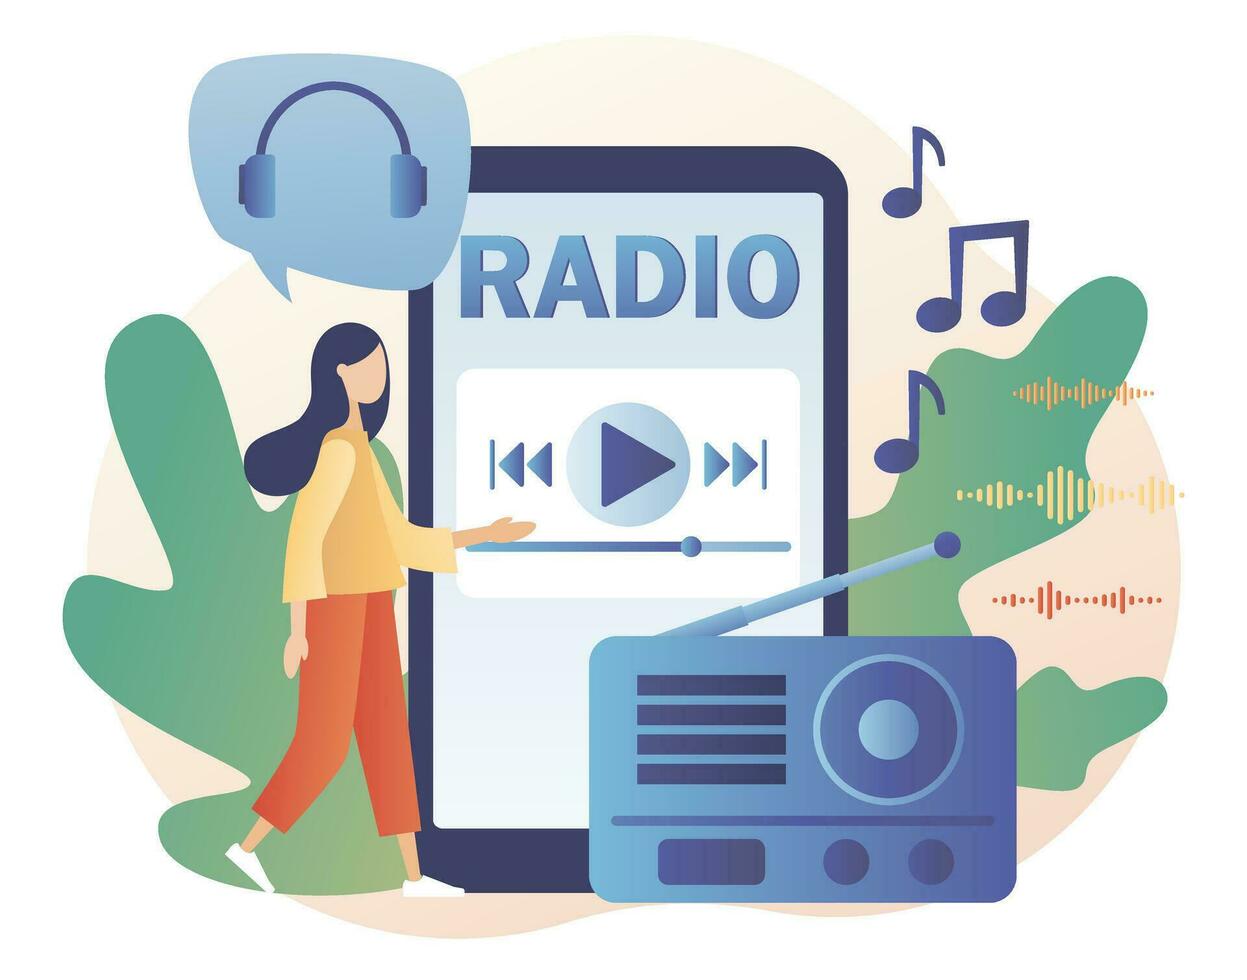 Tiny woman listening Radio On-air in smartphone app. Boombox, audio, music, talk show, interviews of guest online. Retro old radio. Modern flat cartoon style. Vector illustration on white background